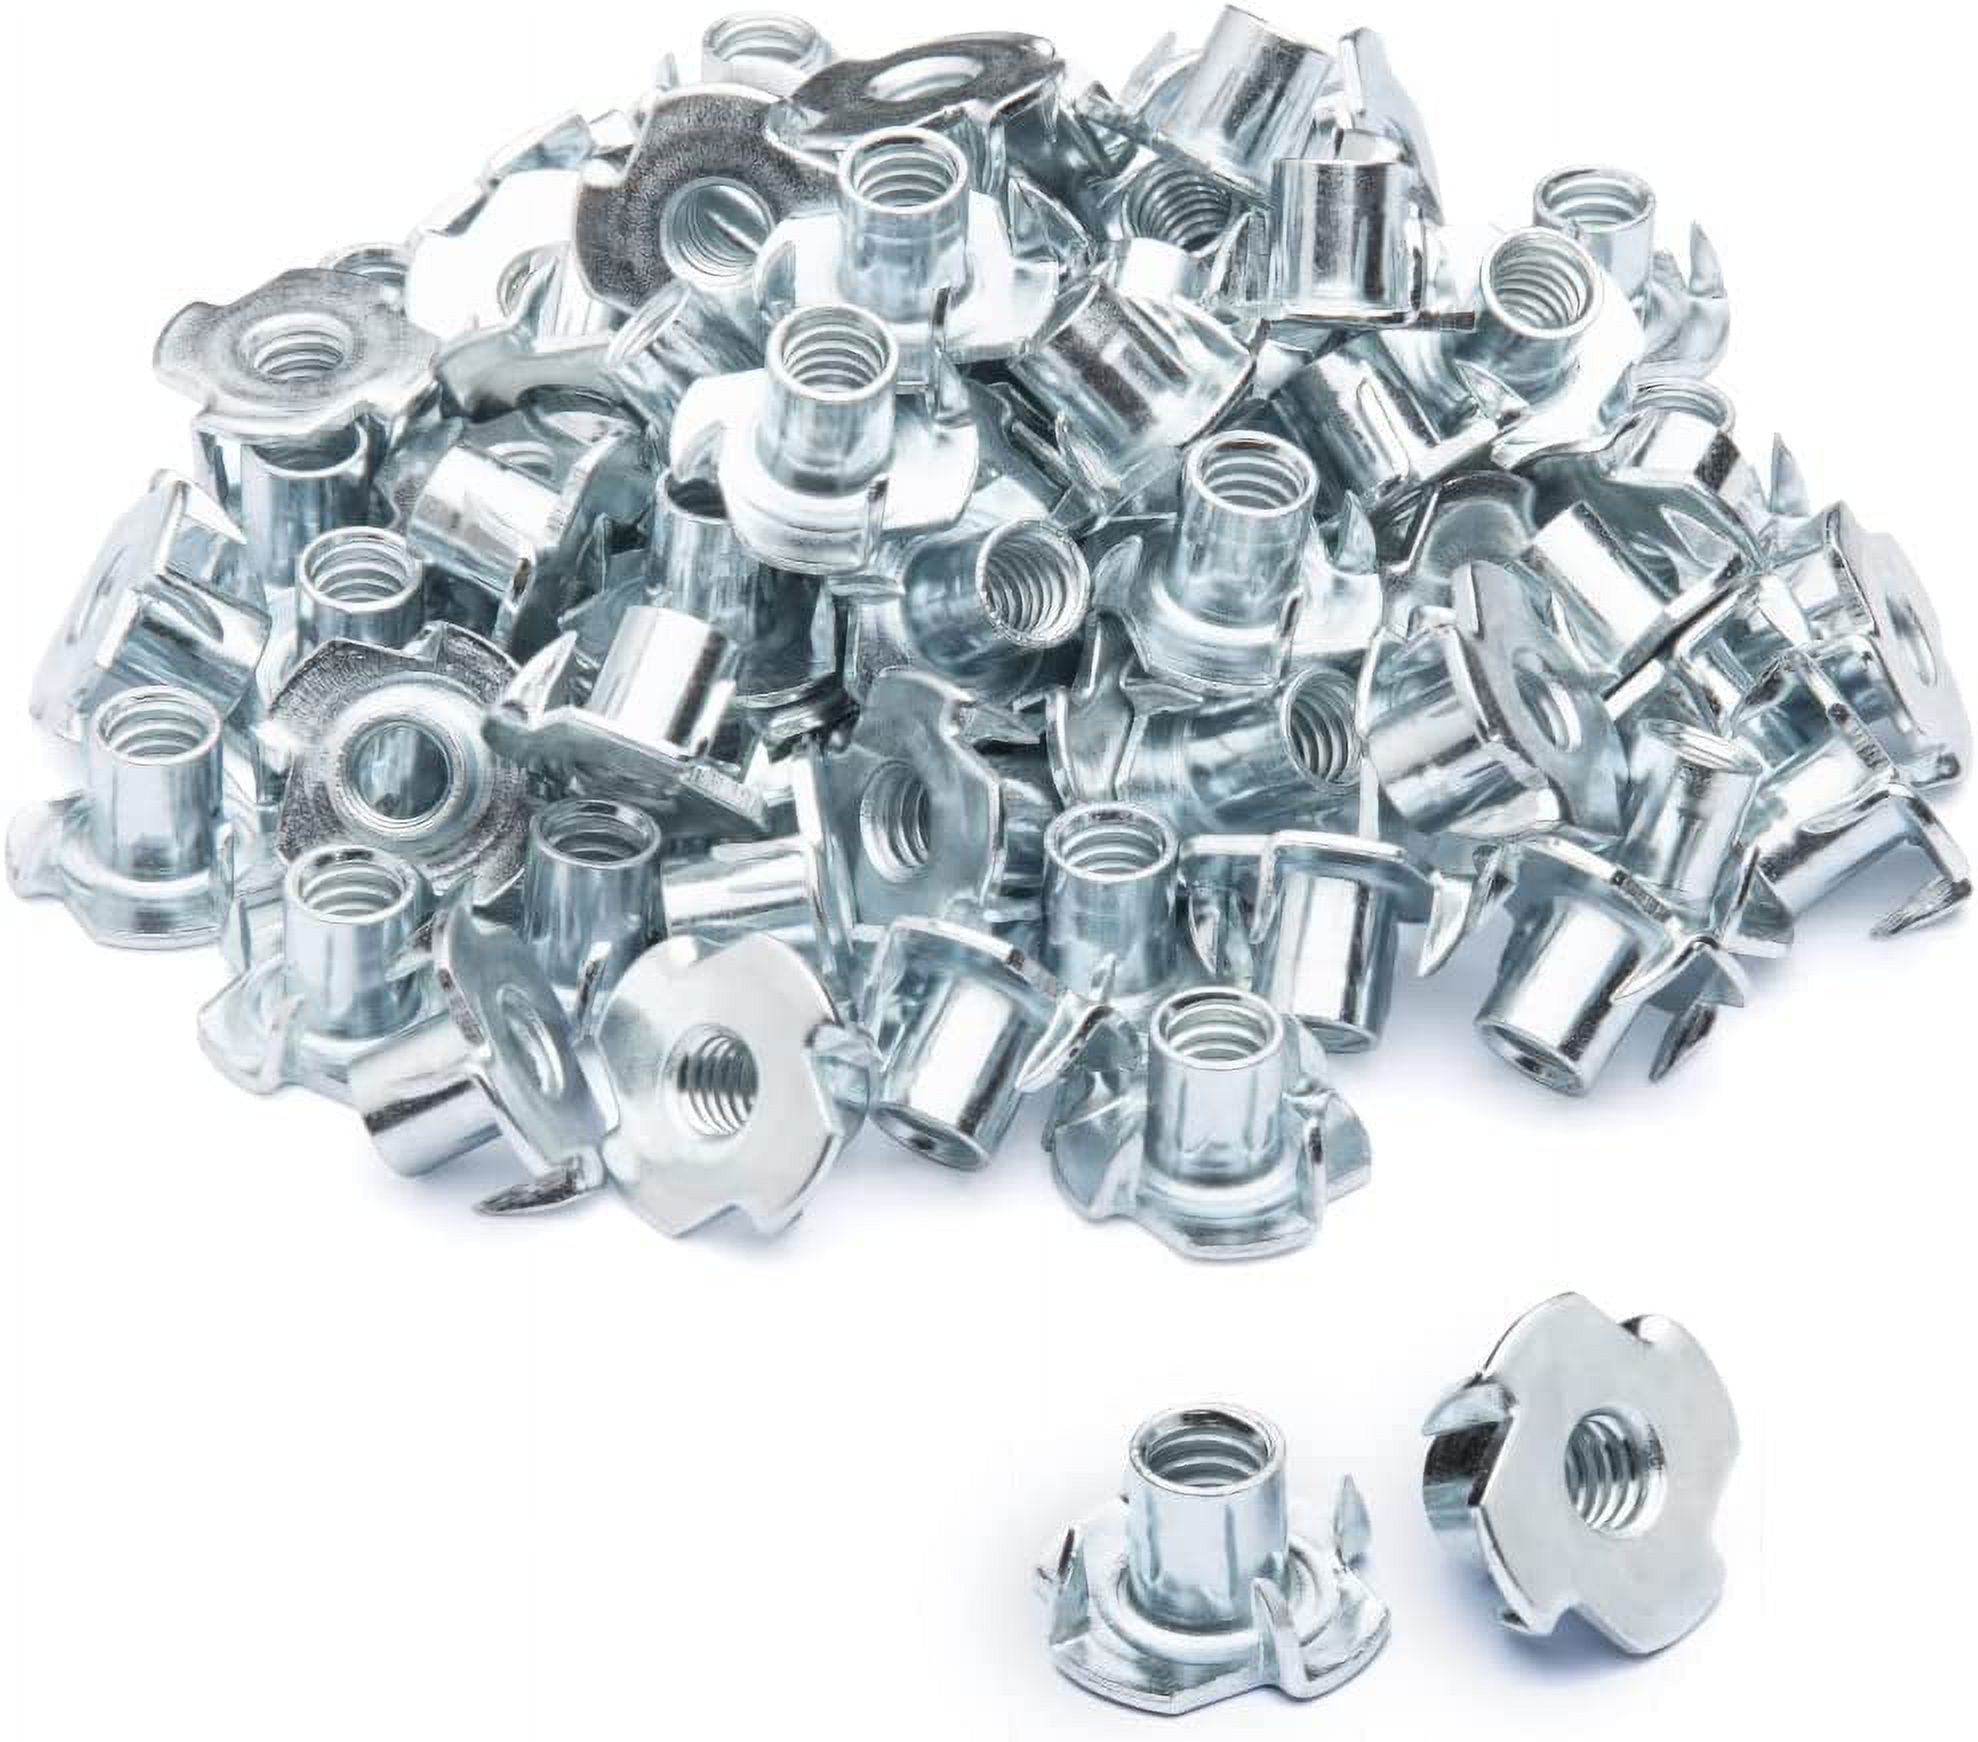 POWERTEC 50Pack Pronged Tee Nuts 1/4 inch - 20 by 7/16-inch (QTN1113) - image 1 of 5